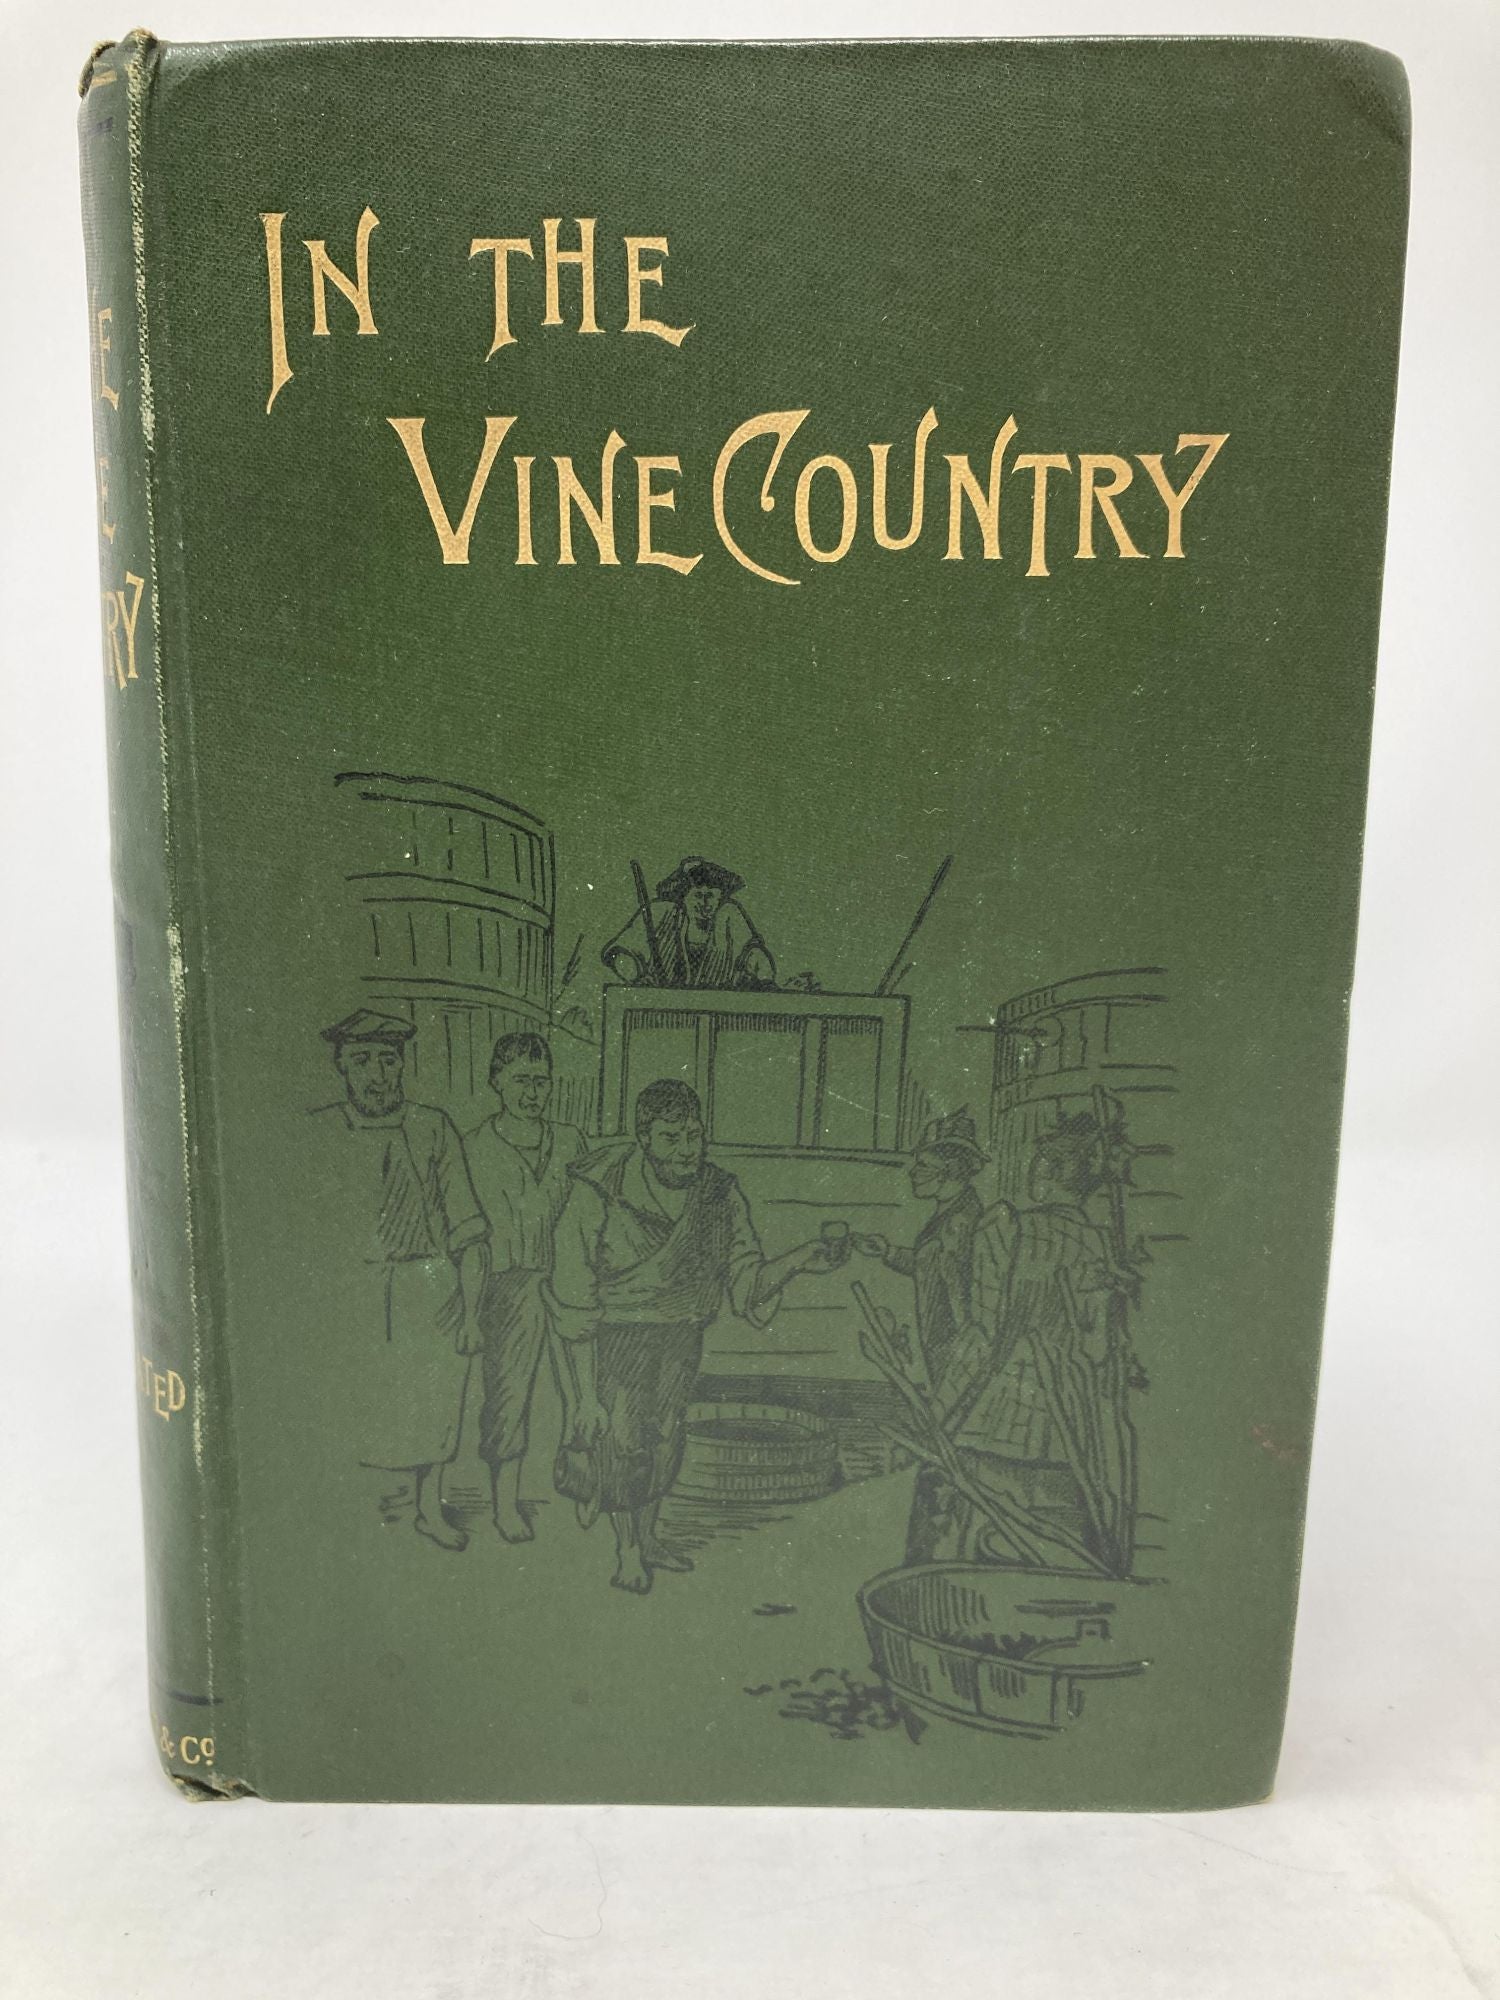 Somerville, E. OE. and Martin Ross - In the Vine Country; Illustrations (3 Hand-Colored) by F.H. Townsend from Sketches by E. Oe. Somerville